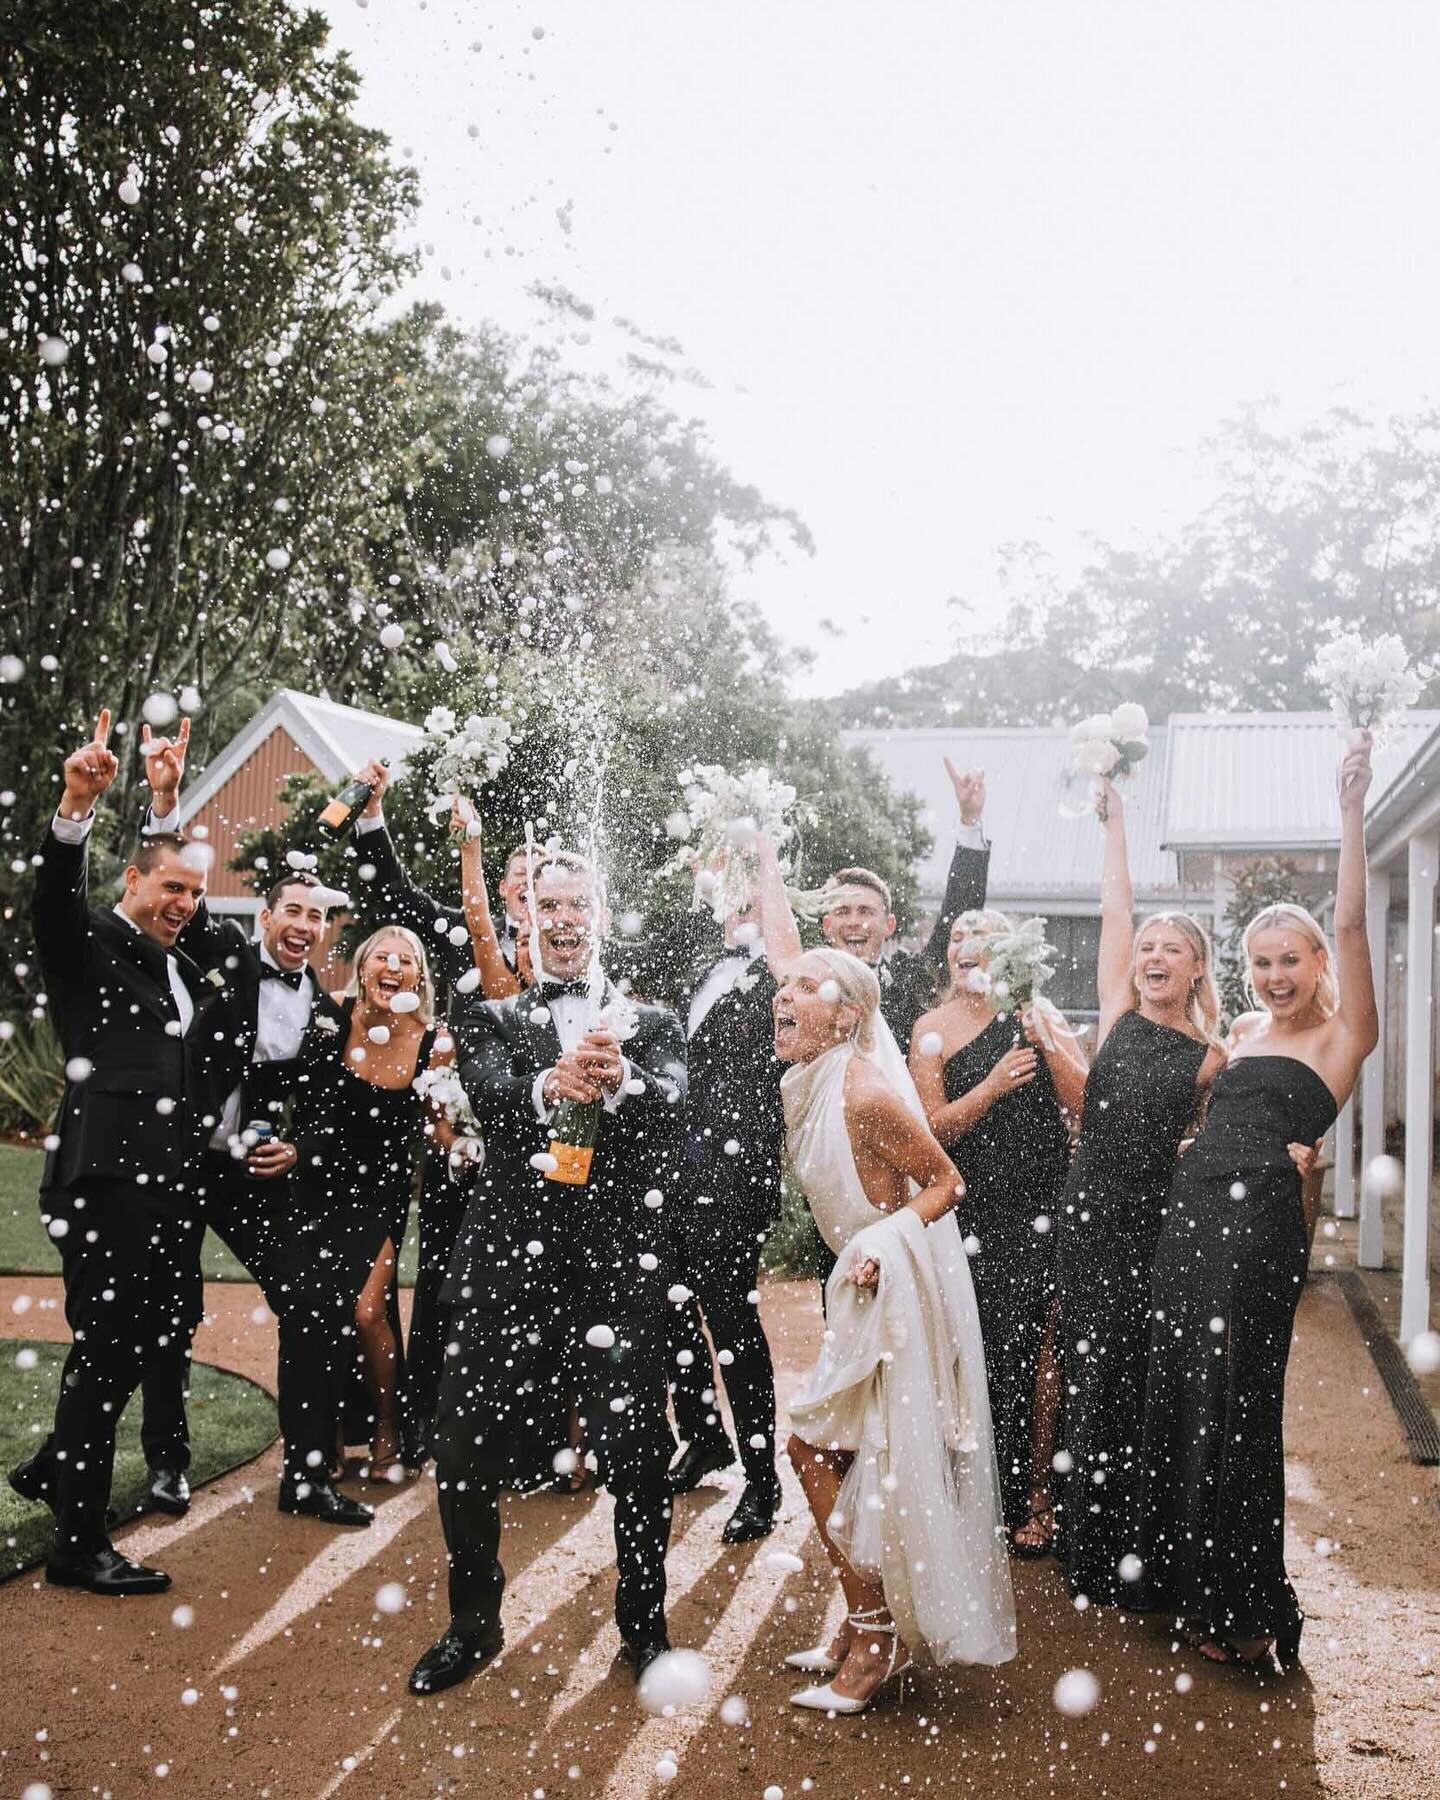 Max and Lara making it rain on an already soggy day at @greyleigh.kiama. Erratic weather didn&rsquo;t stop the party at this epic South Coast wedding. 

~

Photographer: @wills.weddings
Videographer: @wills.weddings
Venue: @greyleigh.kiama
Celebrant: